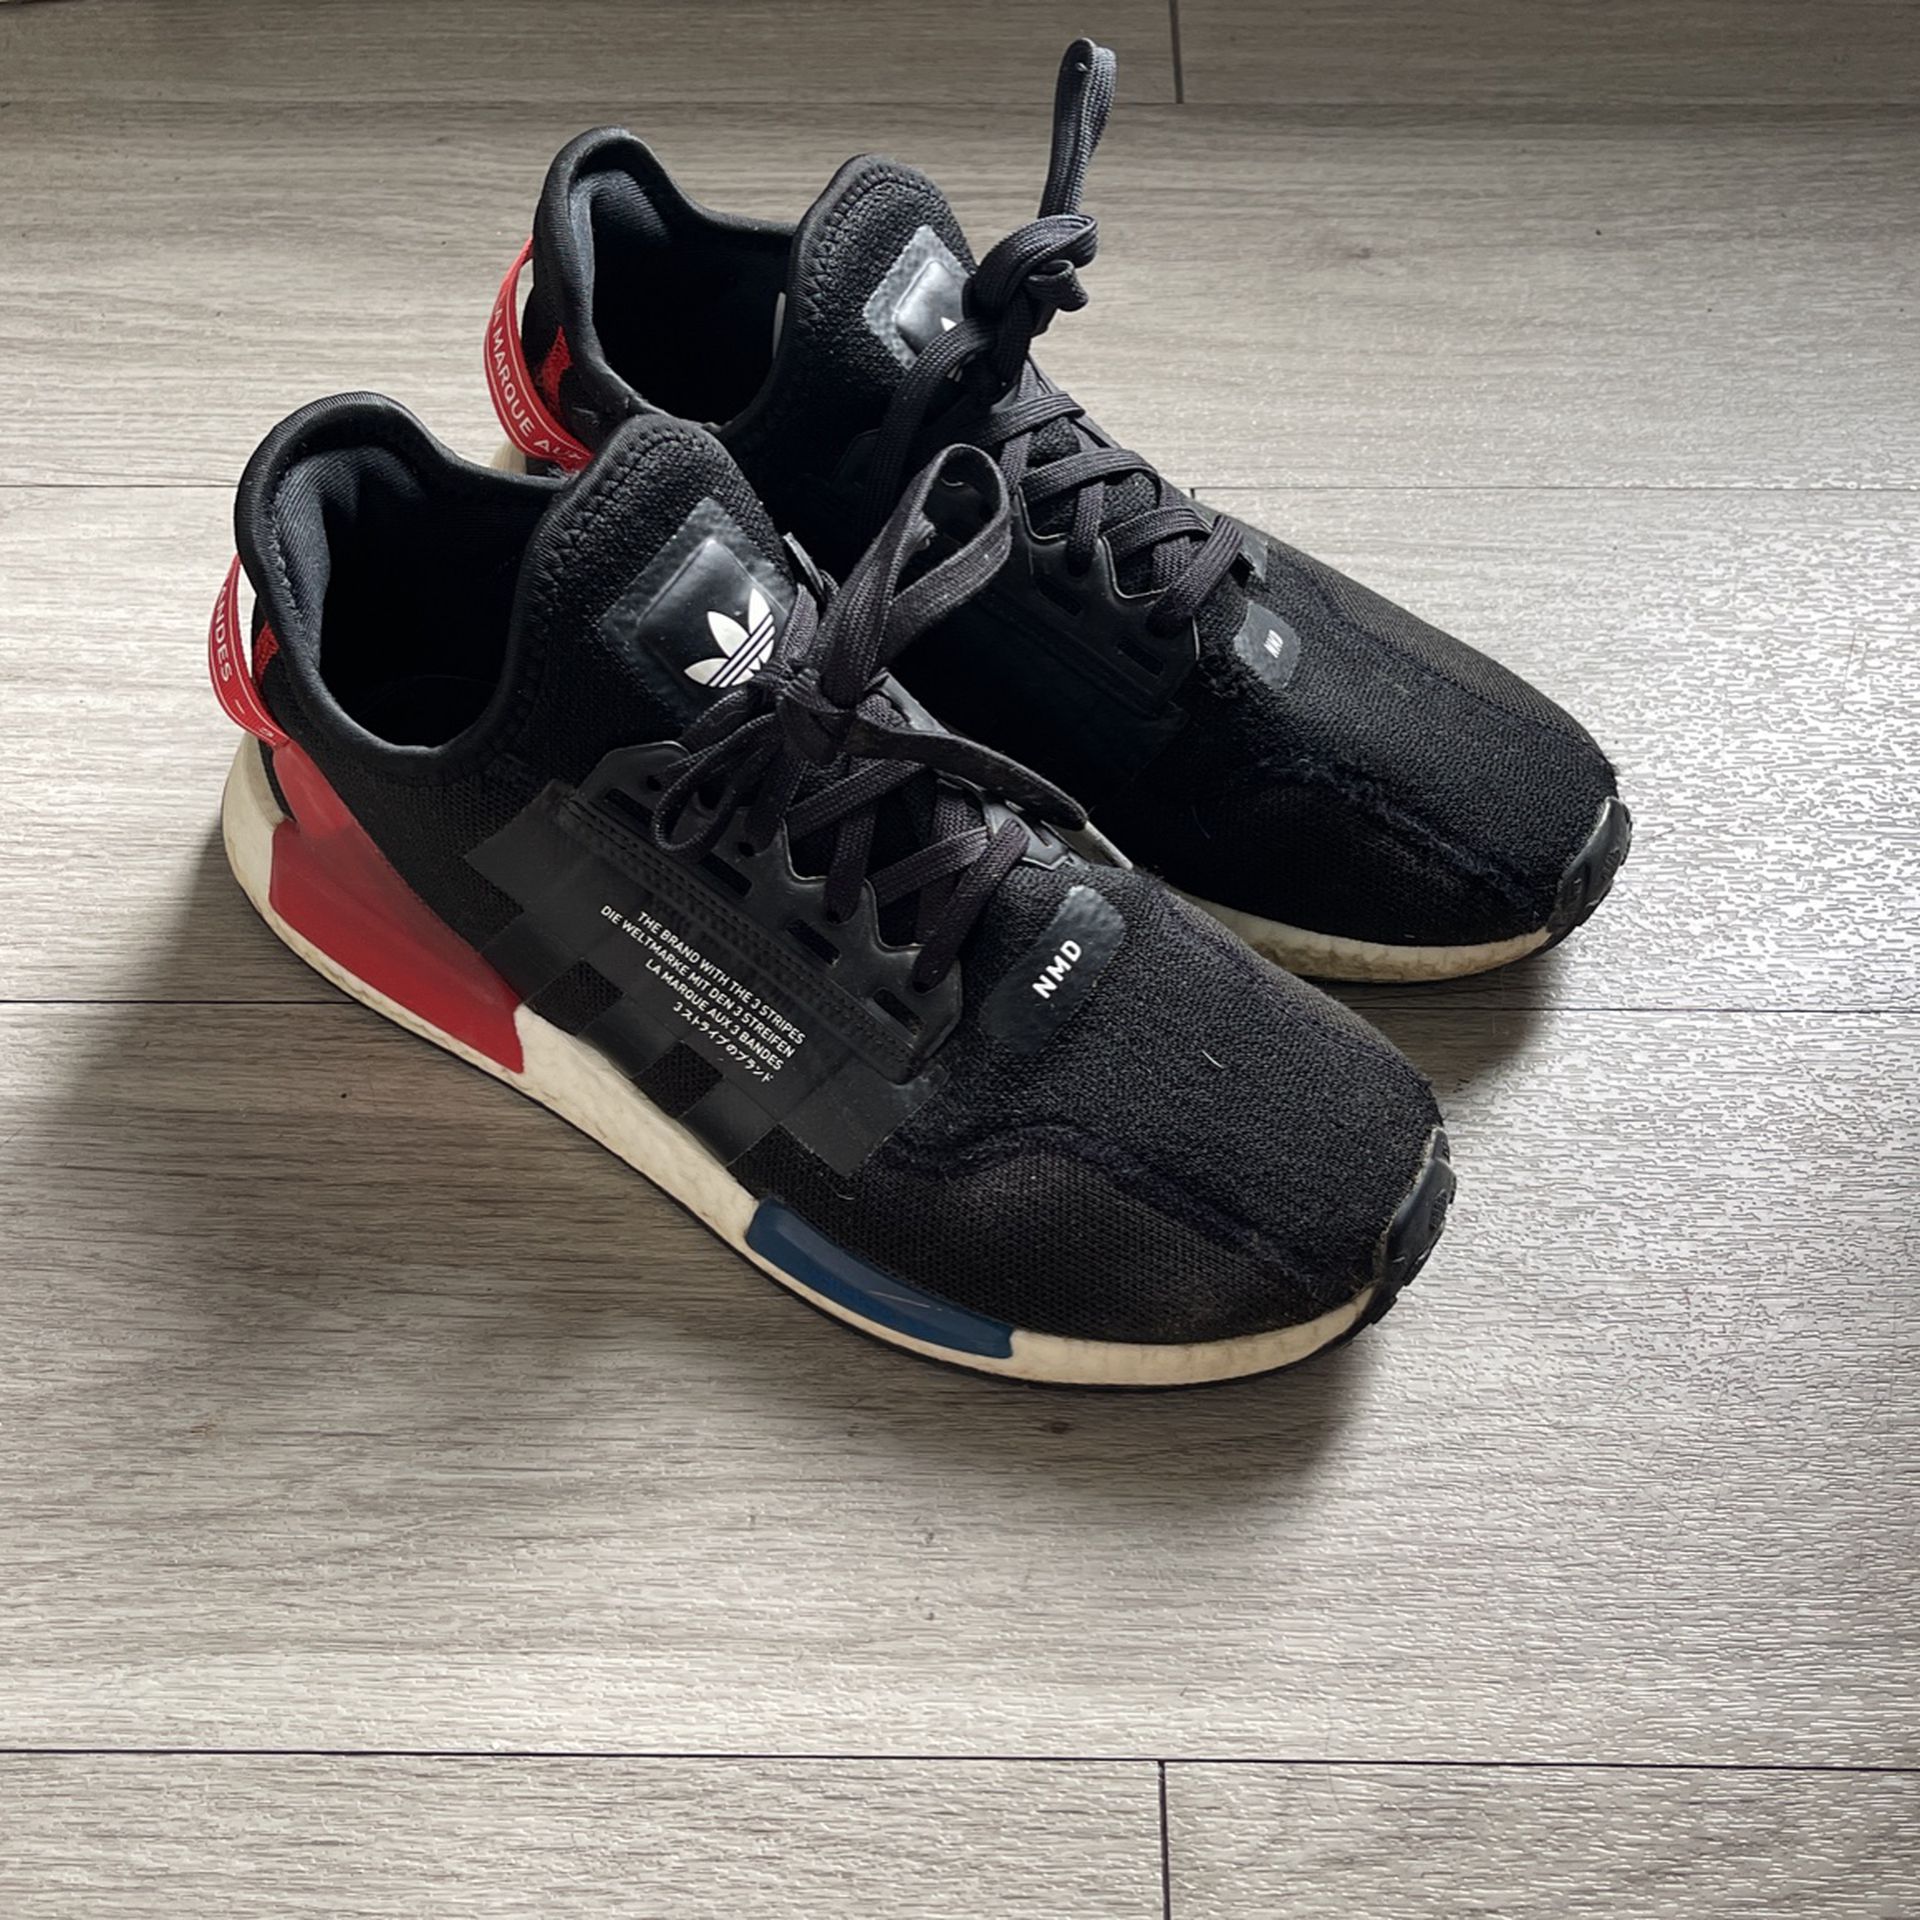 Adidas NMD_R1 Shoes - 10.5